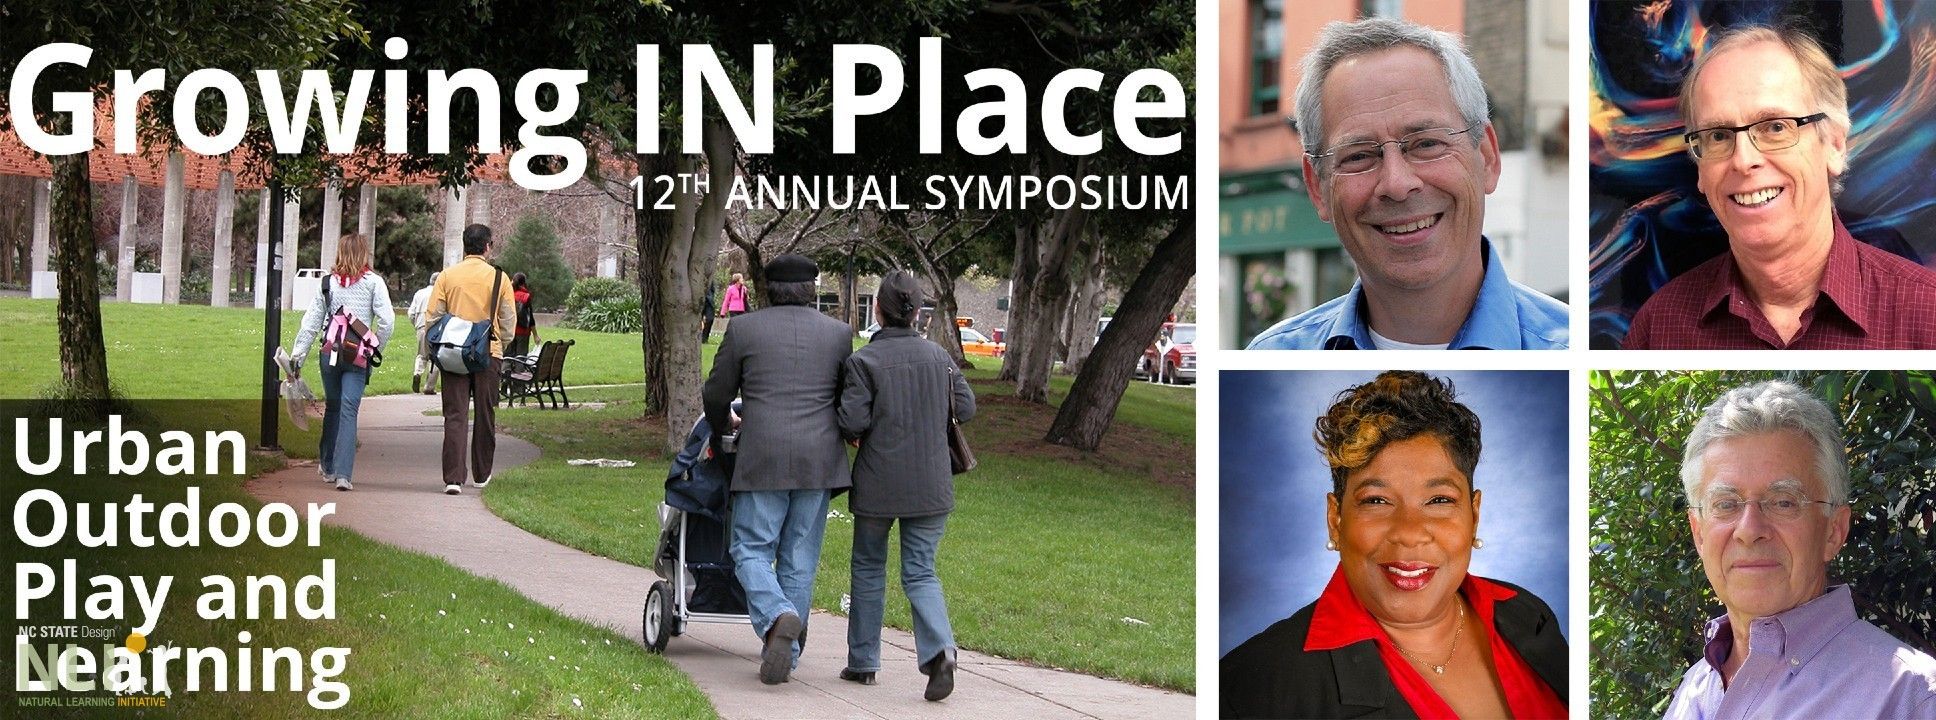 12th Annual Growing IN Place Symposium